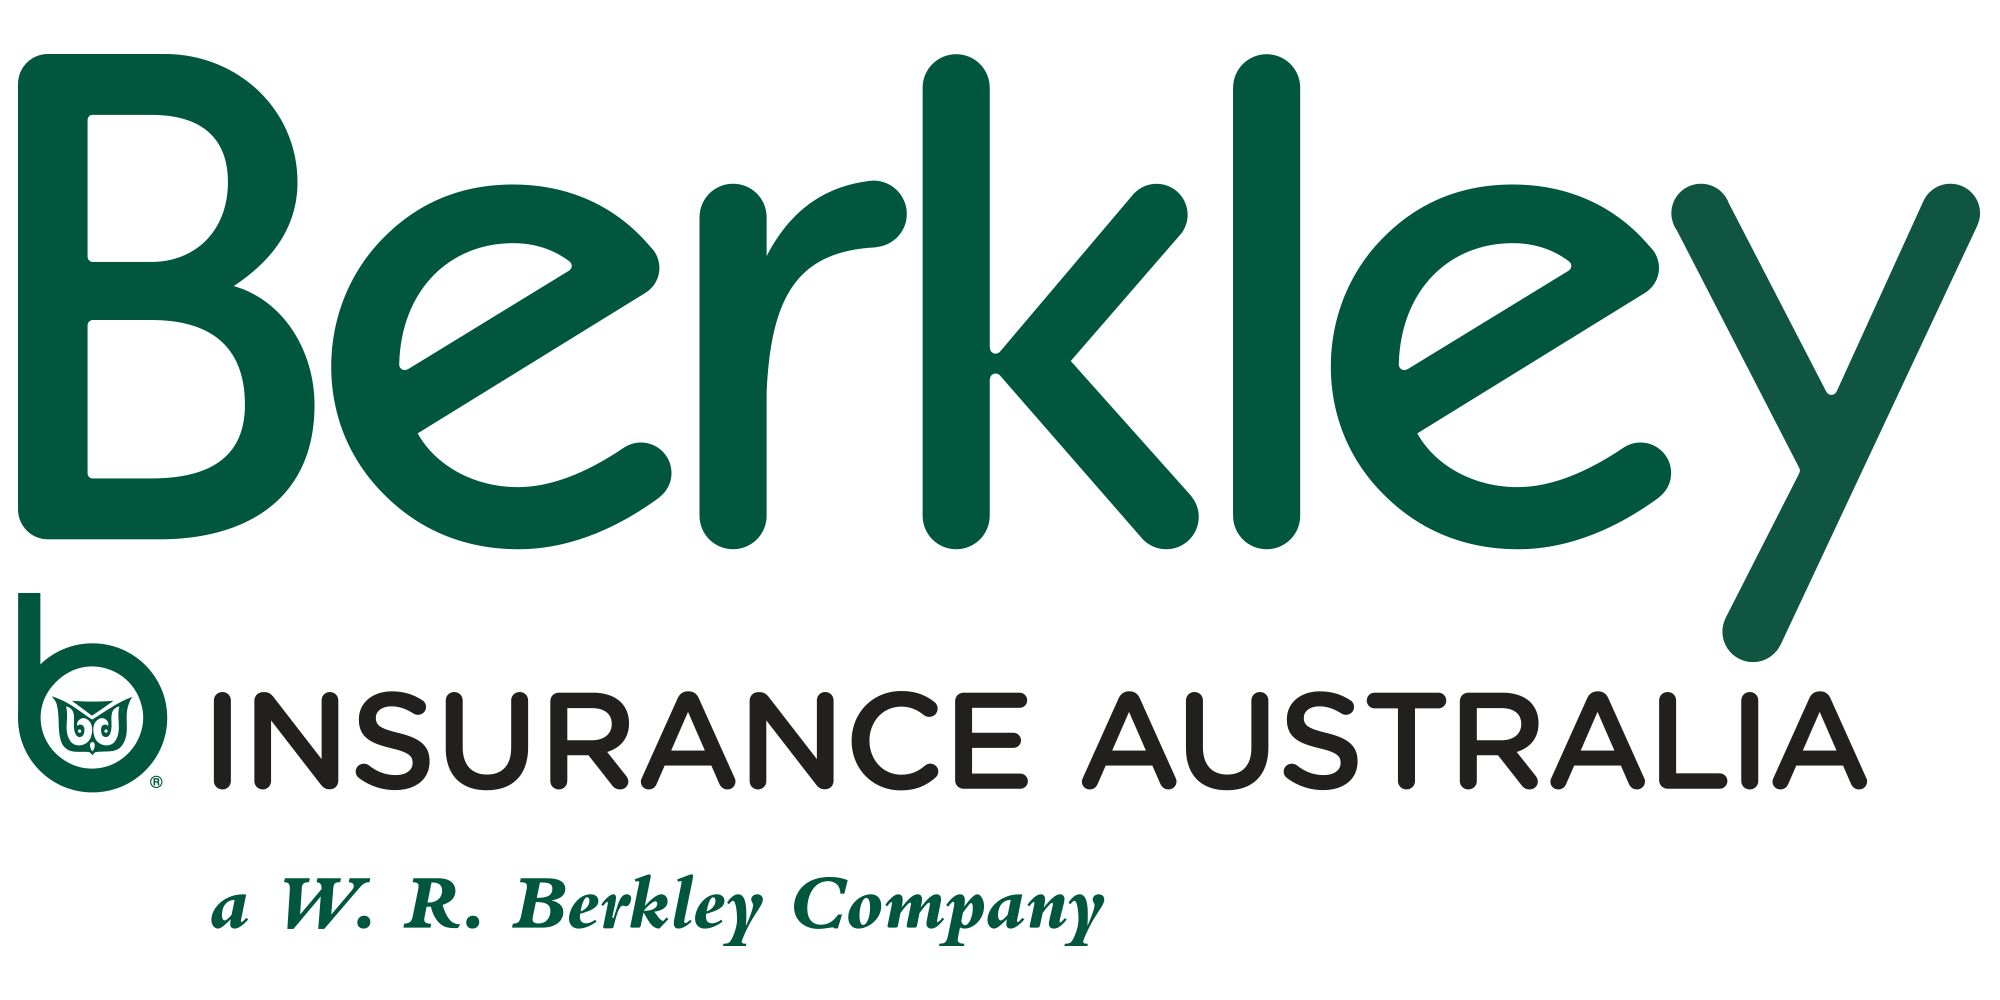 Berkley Insurance Australia Fleet Motor Insurance Proposal All questions are to be answered. If insufficient space, please attach additional information.